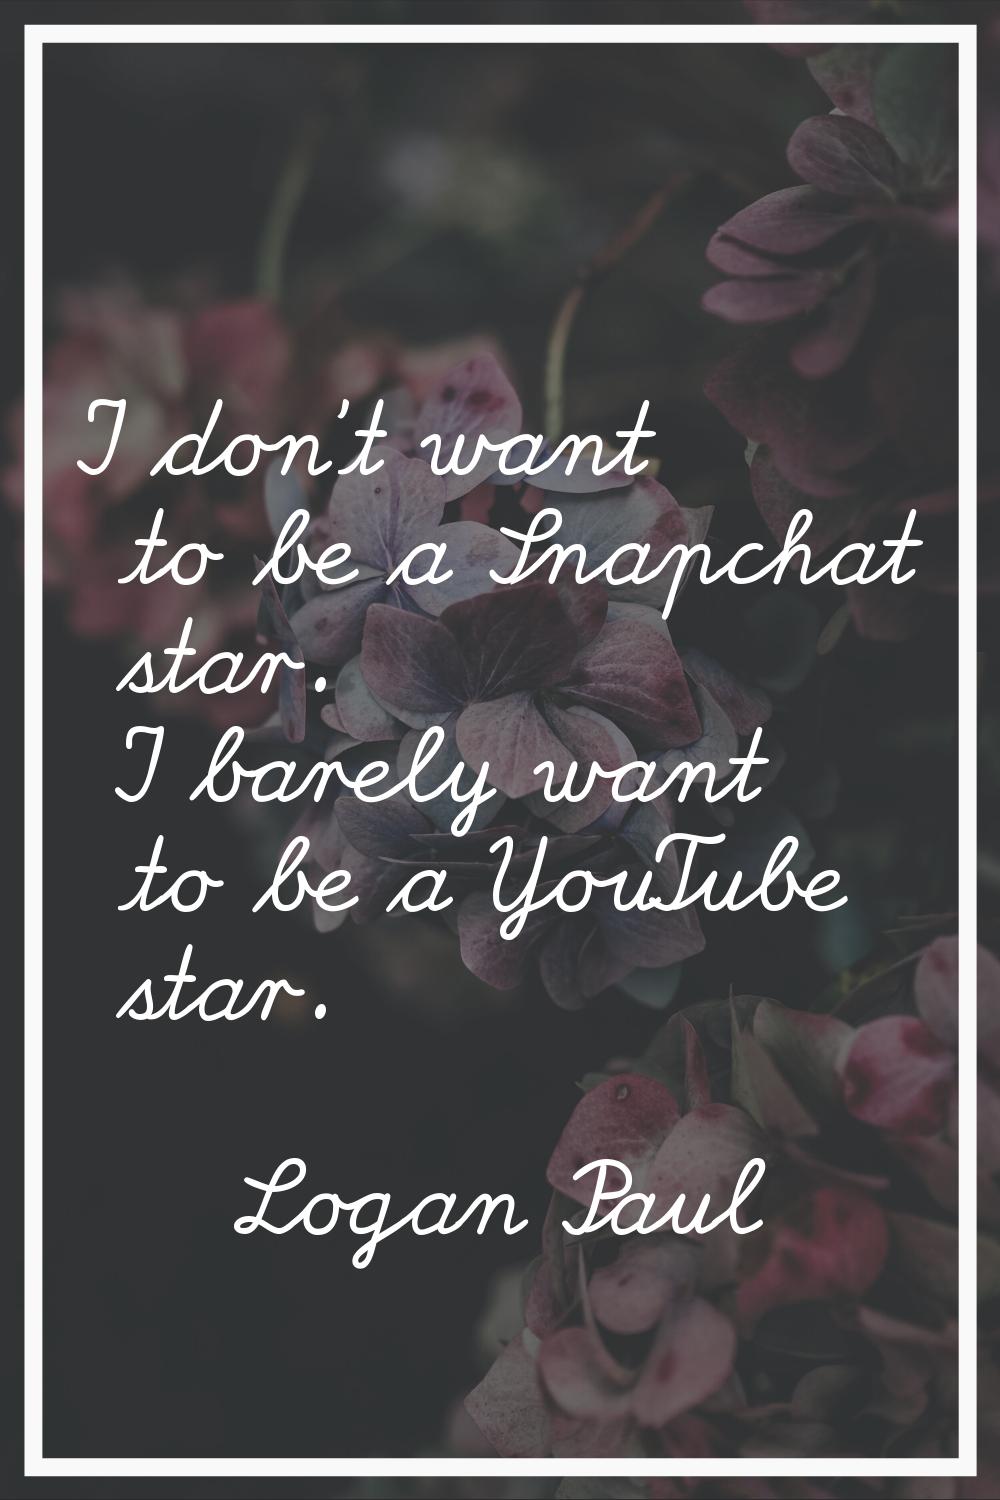 I don't want to be a Snapchat star. I barely want to be a YouTube star.